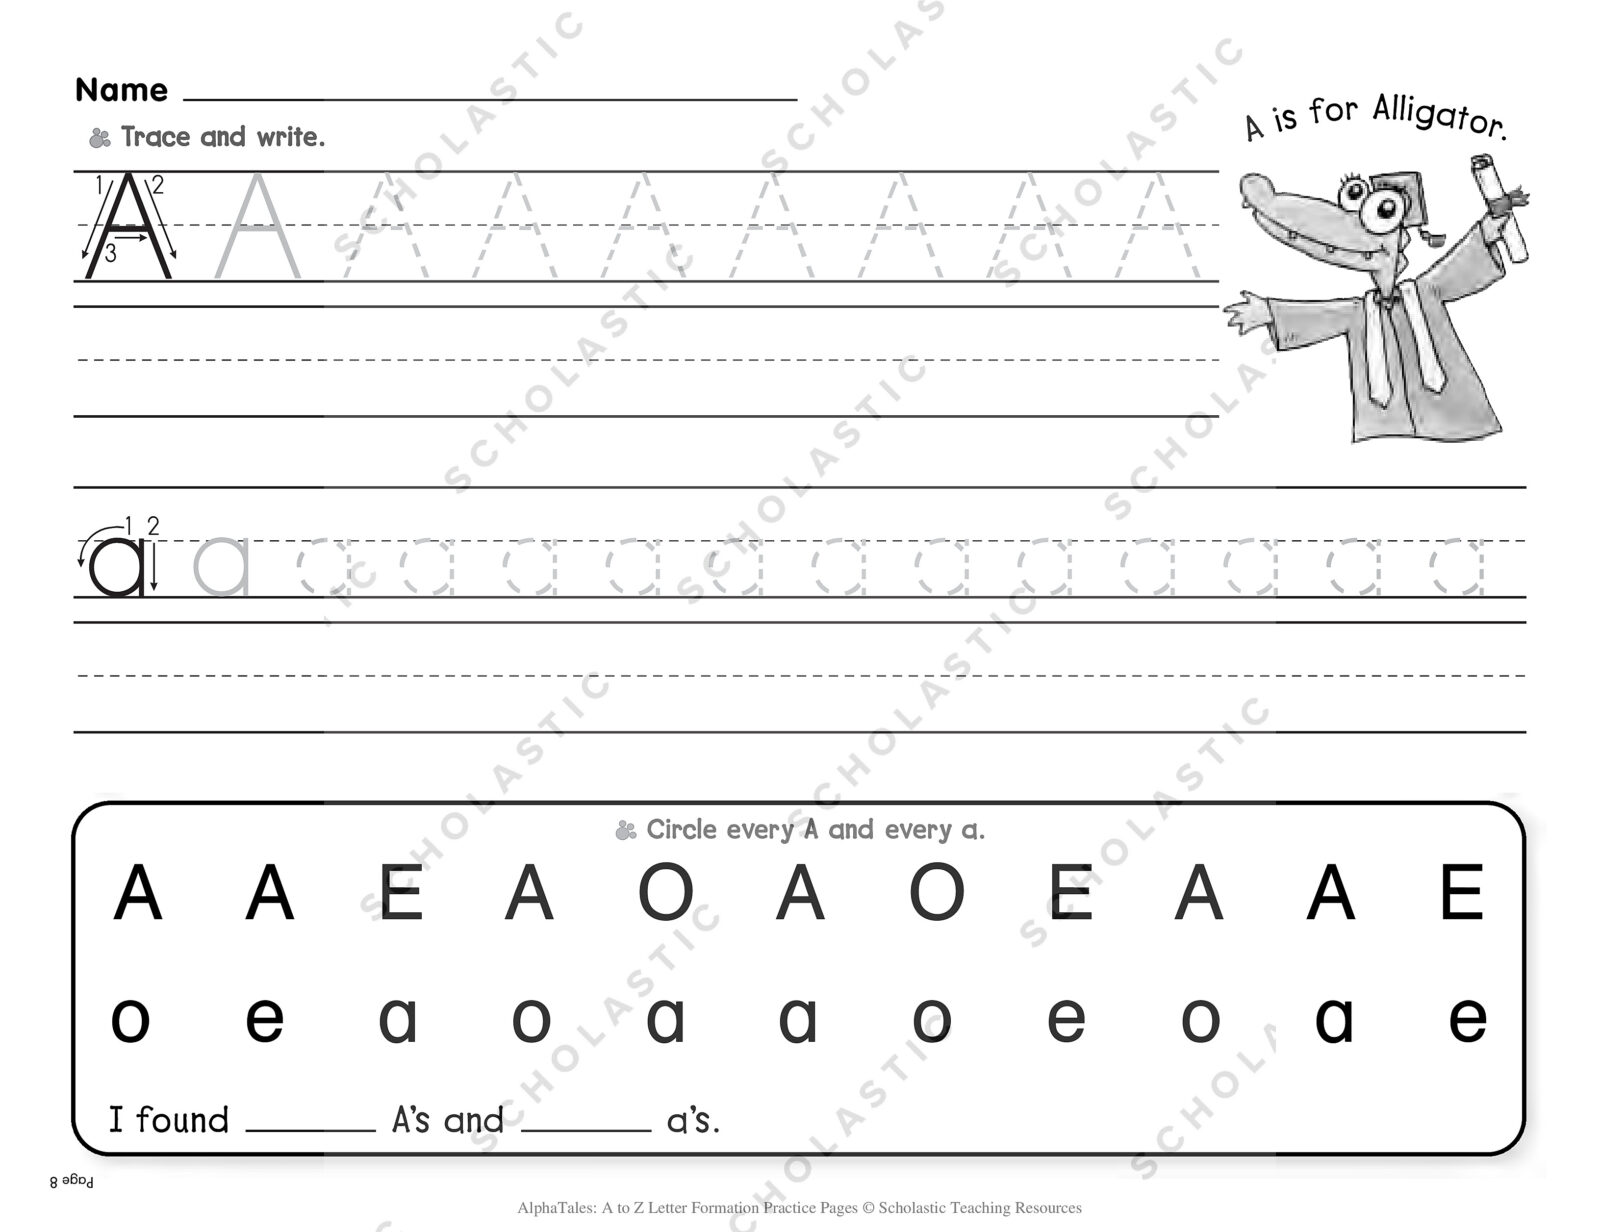 AlphaTales: A to Z Letter Formation Practice Pages The Scholastic Teacher  Store